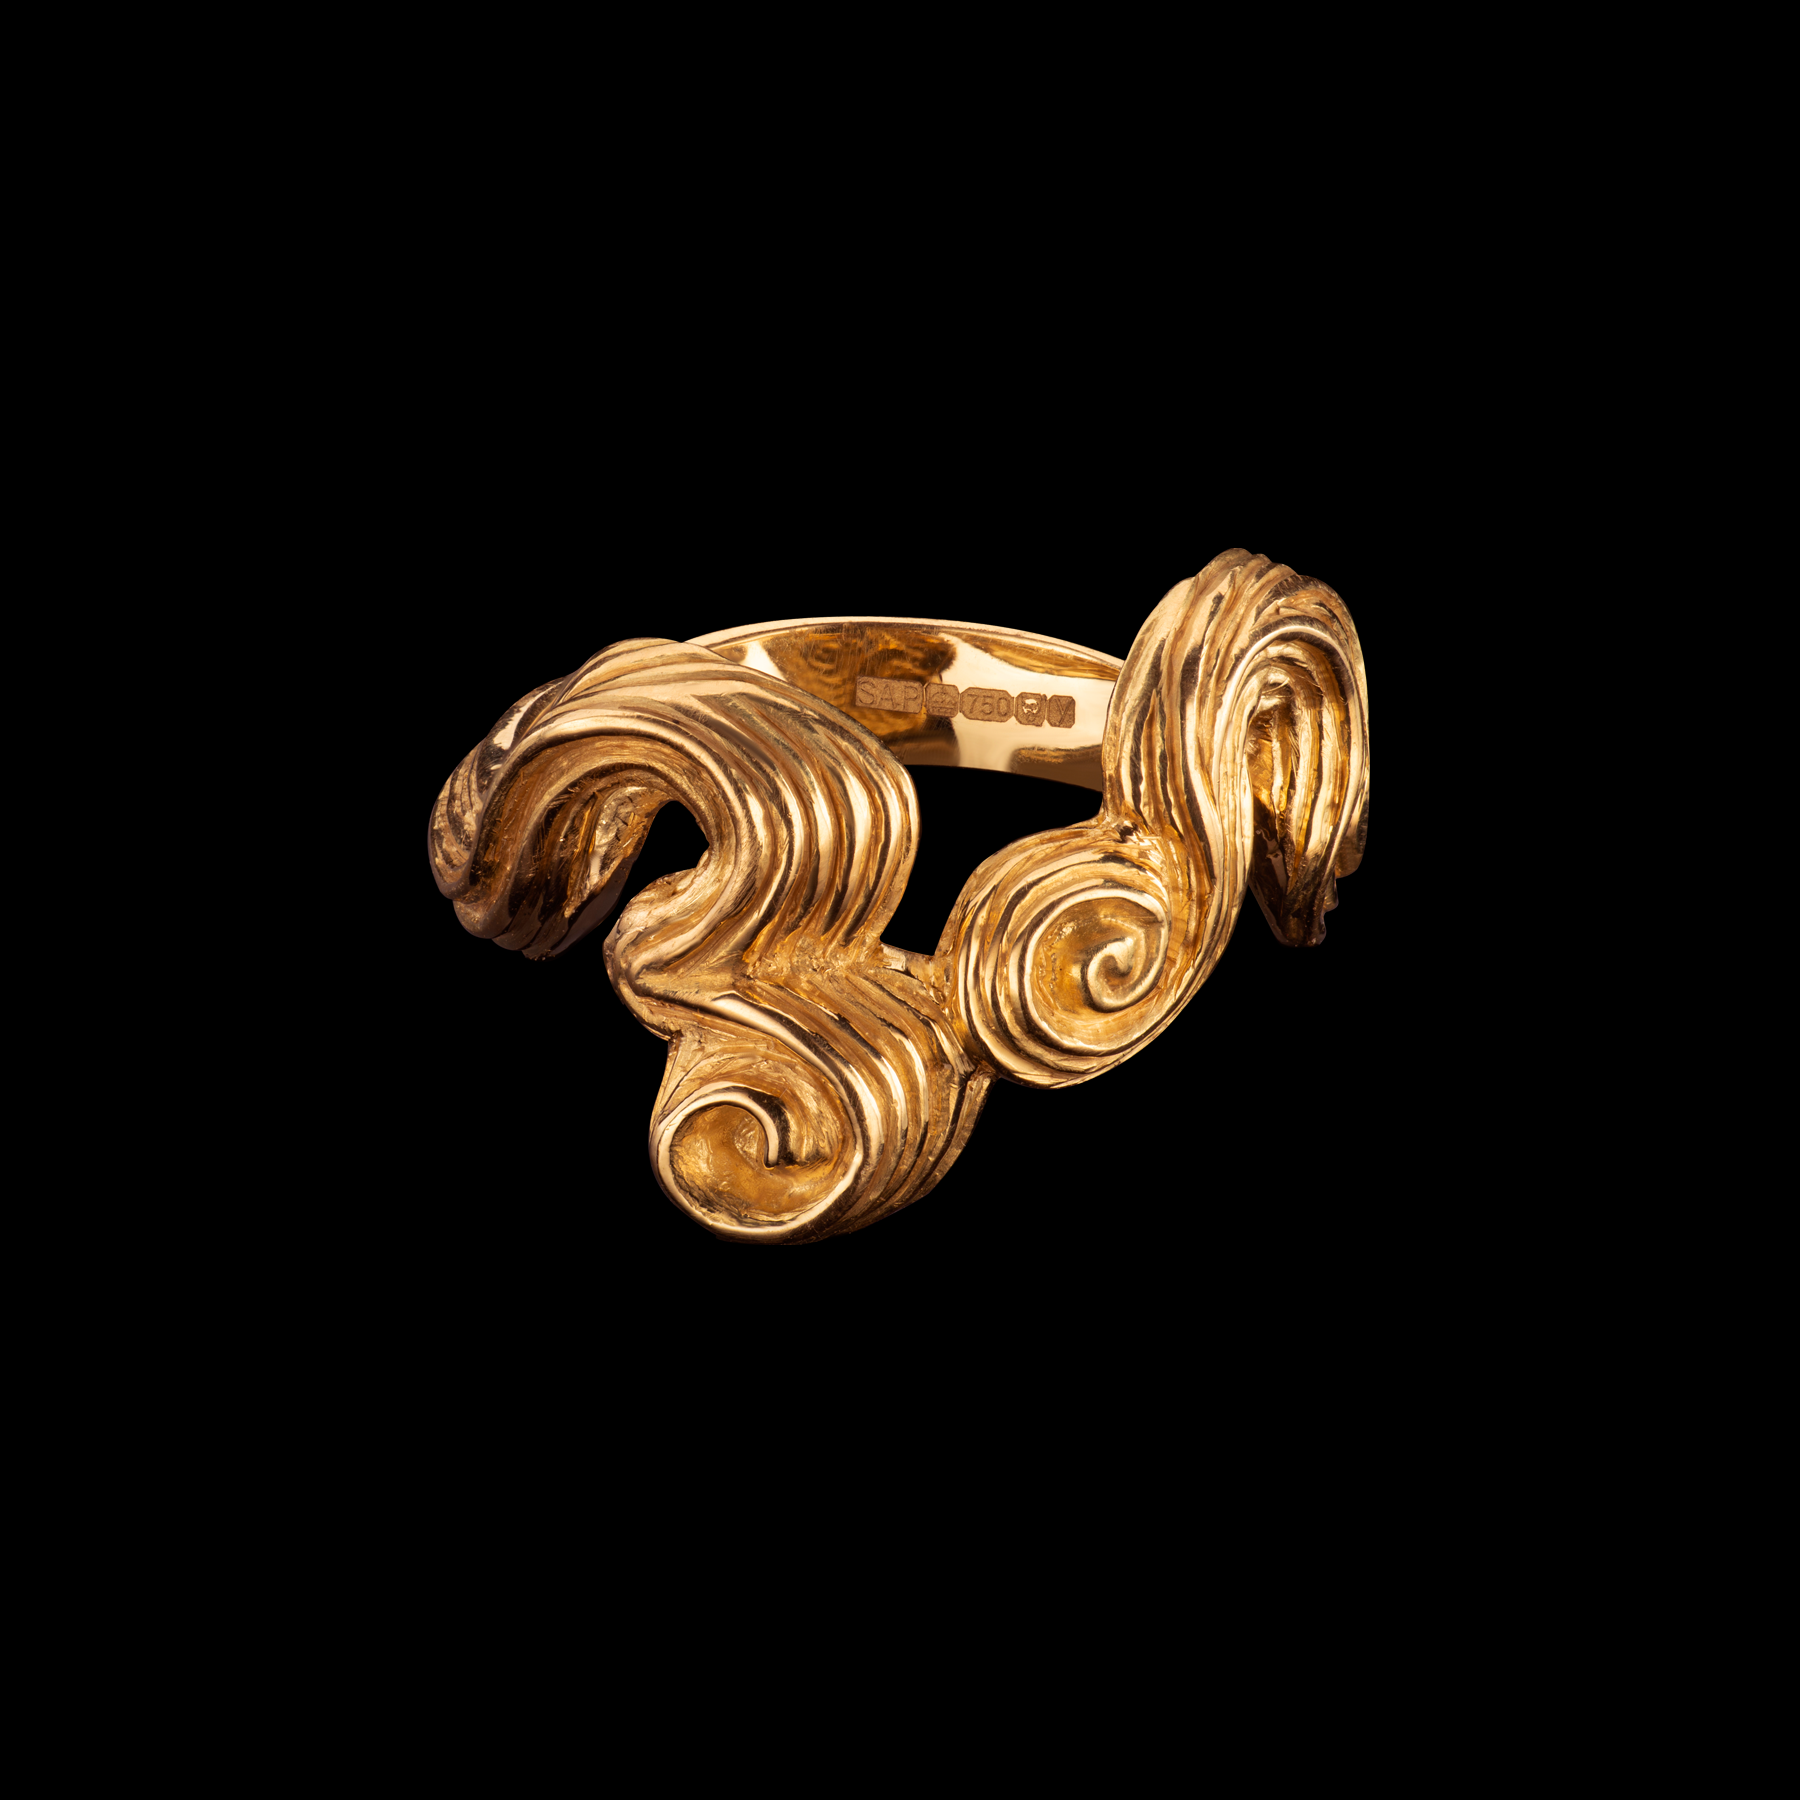 The lock ring by Solange Azagury-Partridge - 18 karat yellow gold form - front view 0